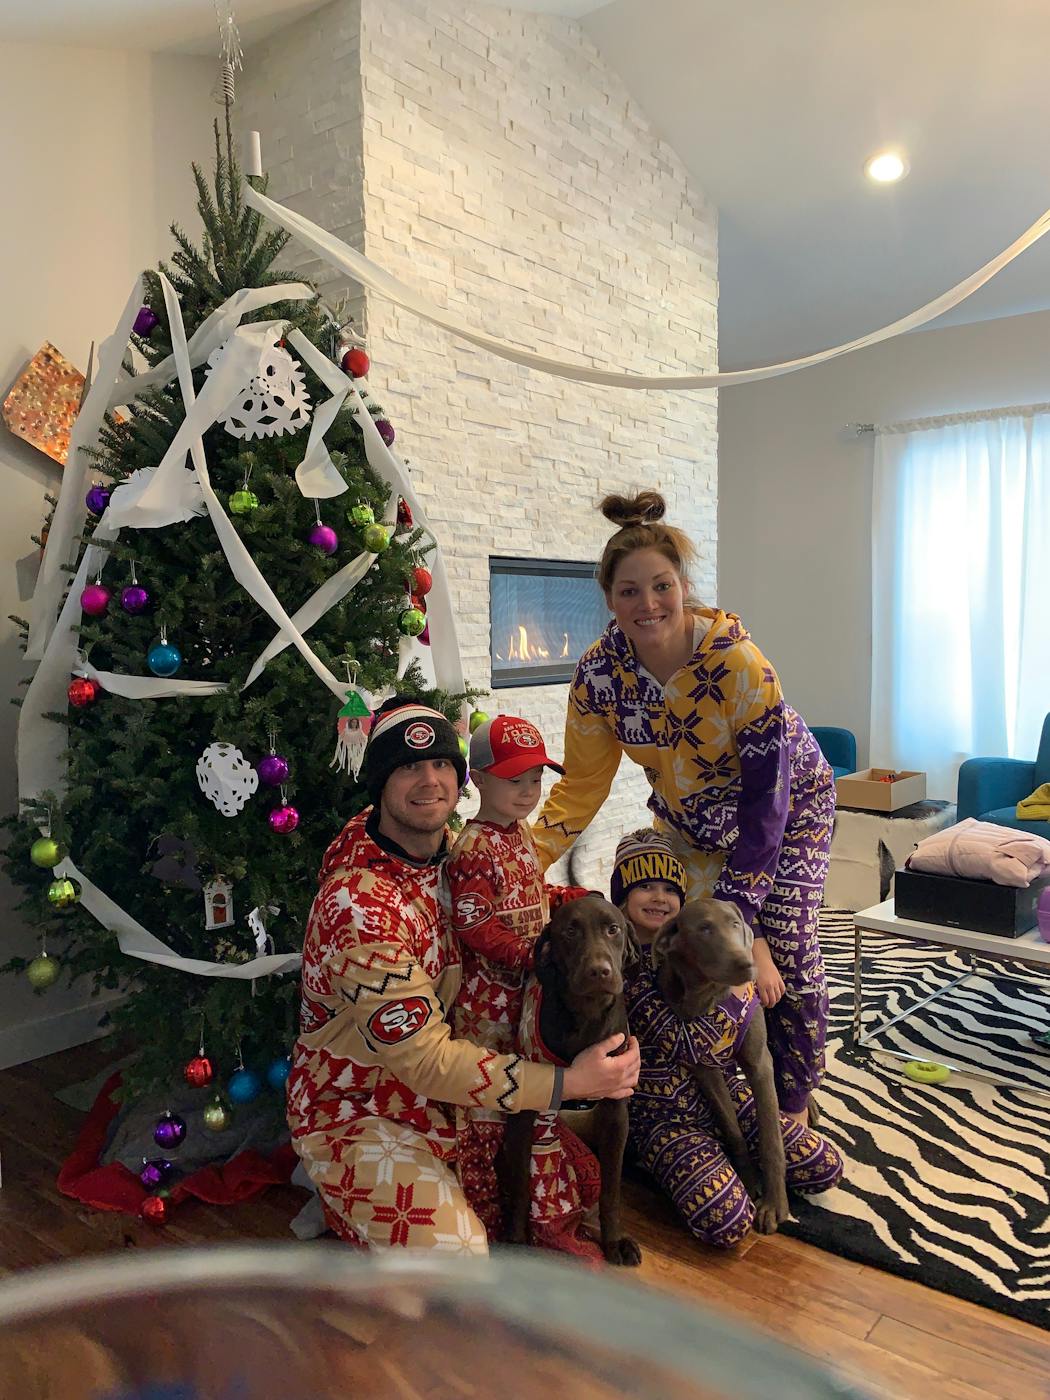 The Golds of Prescott, Wis., celebrated around the Christmas tree in their 49ers and Vikings jammies.